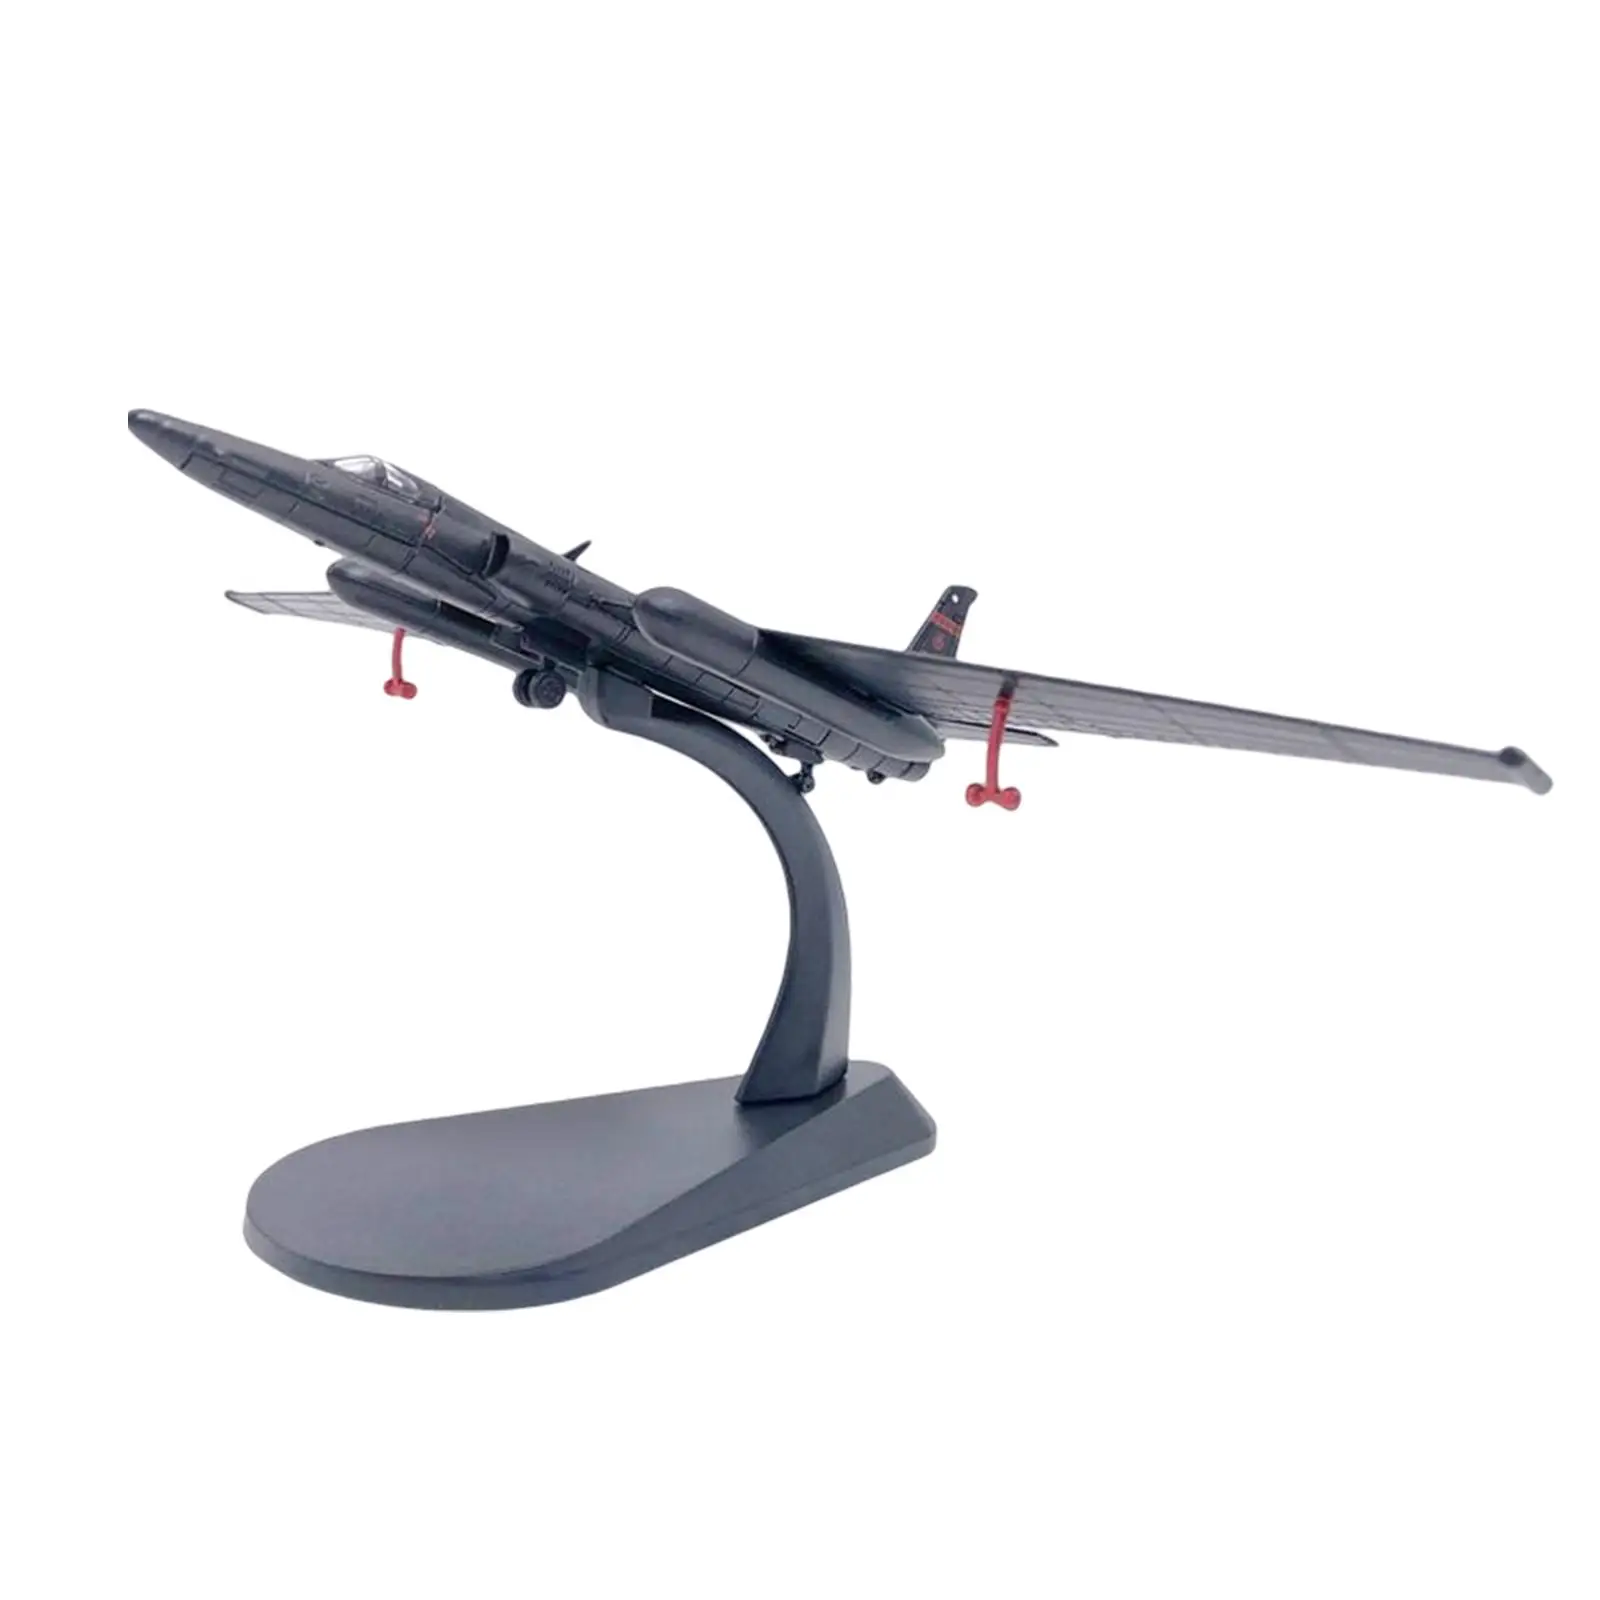 1:144 U2 Reconnaissance Airplane Model with Stand, ,13.5Cmx21.5cm Ornaments